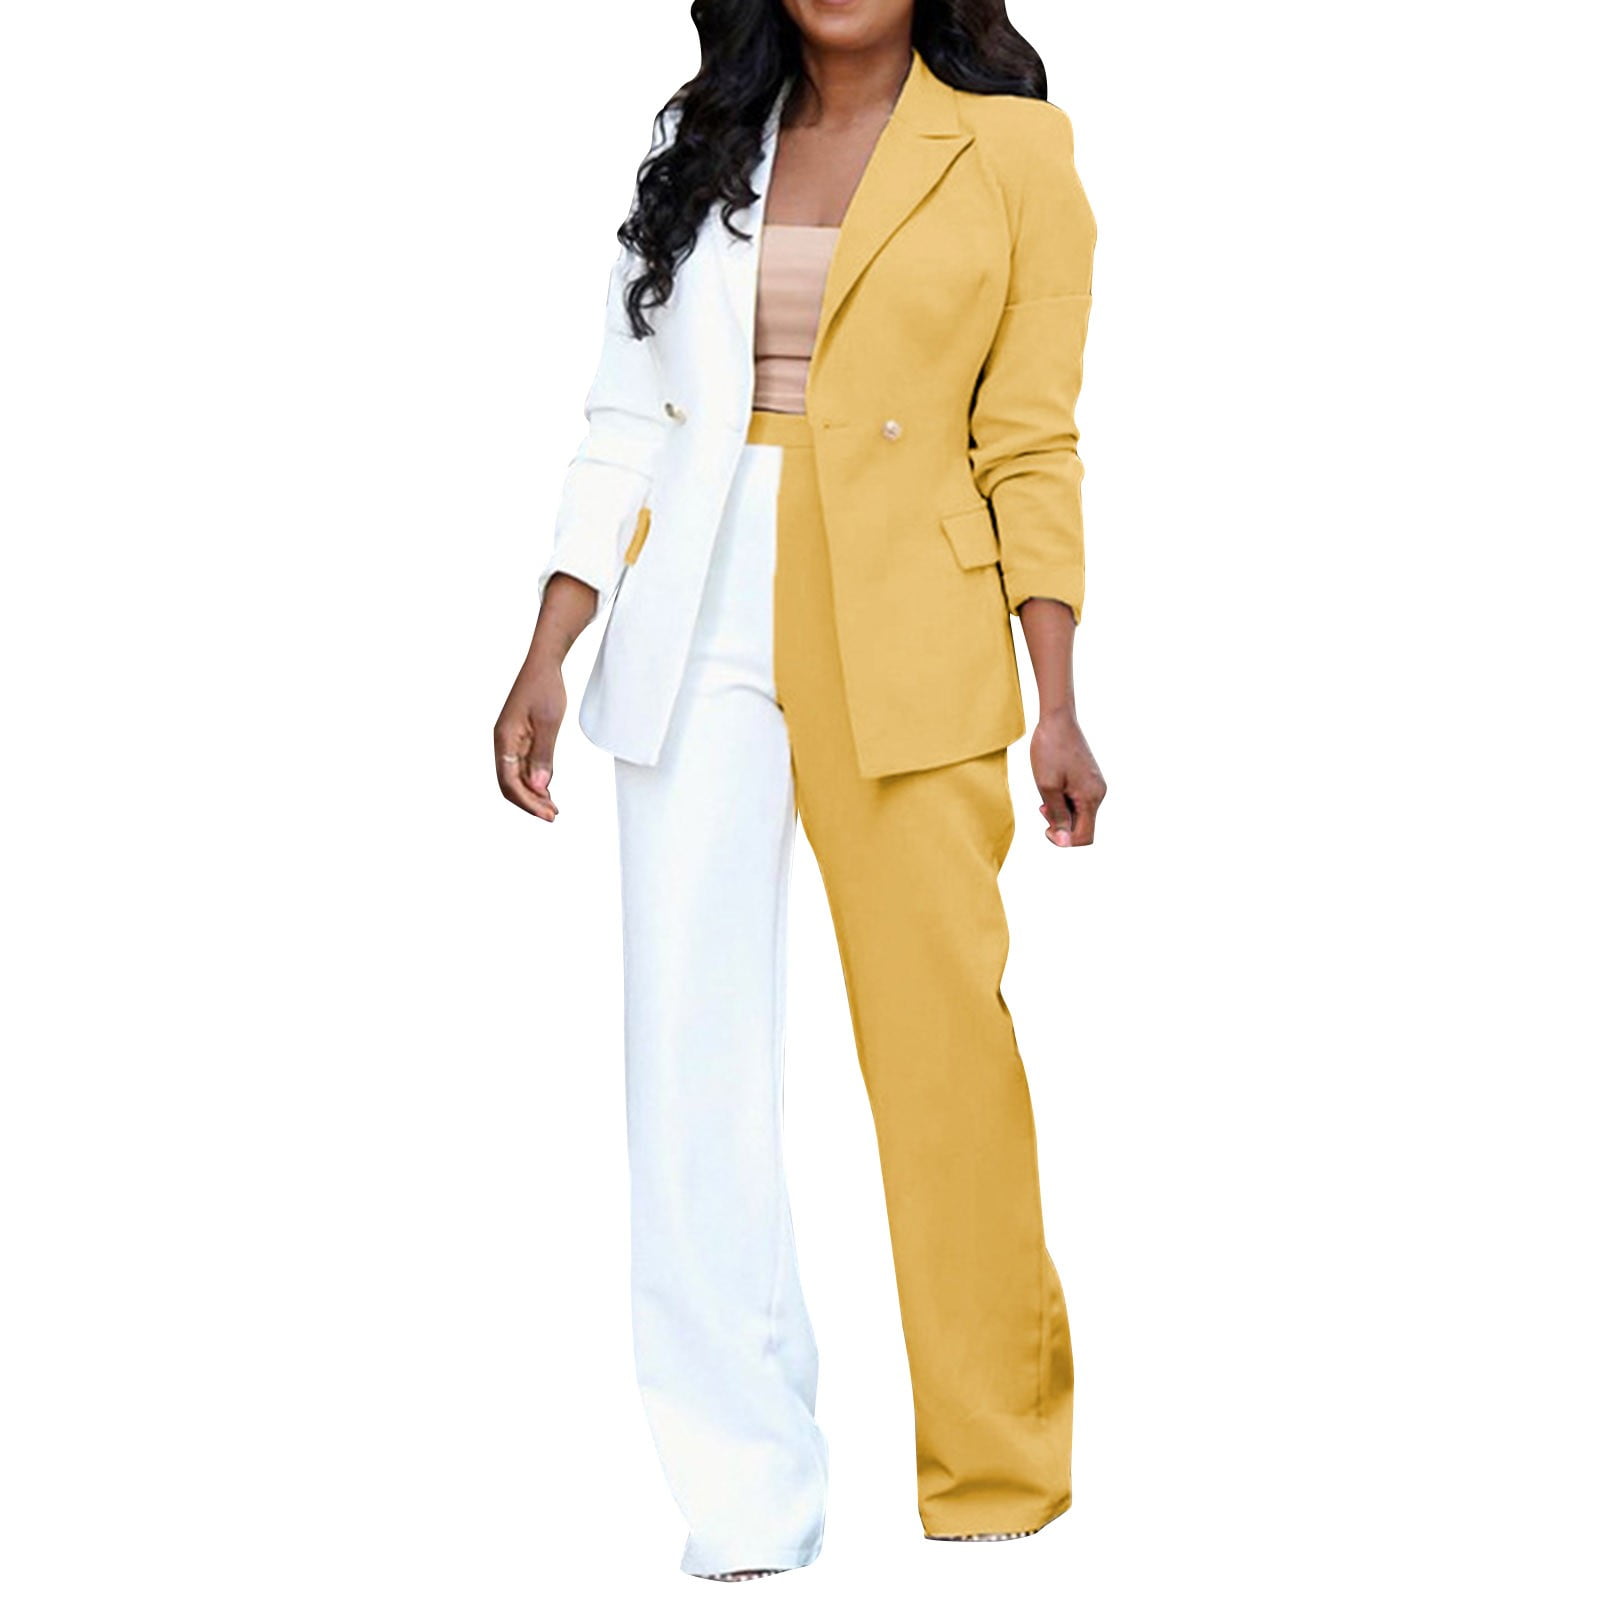 NKOOGH Dressy Wedding Pant Suits Two Piece for Women Pants